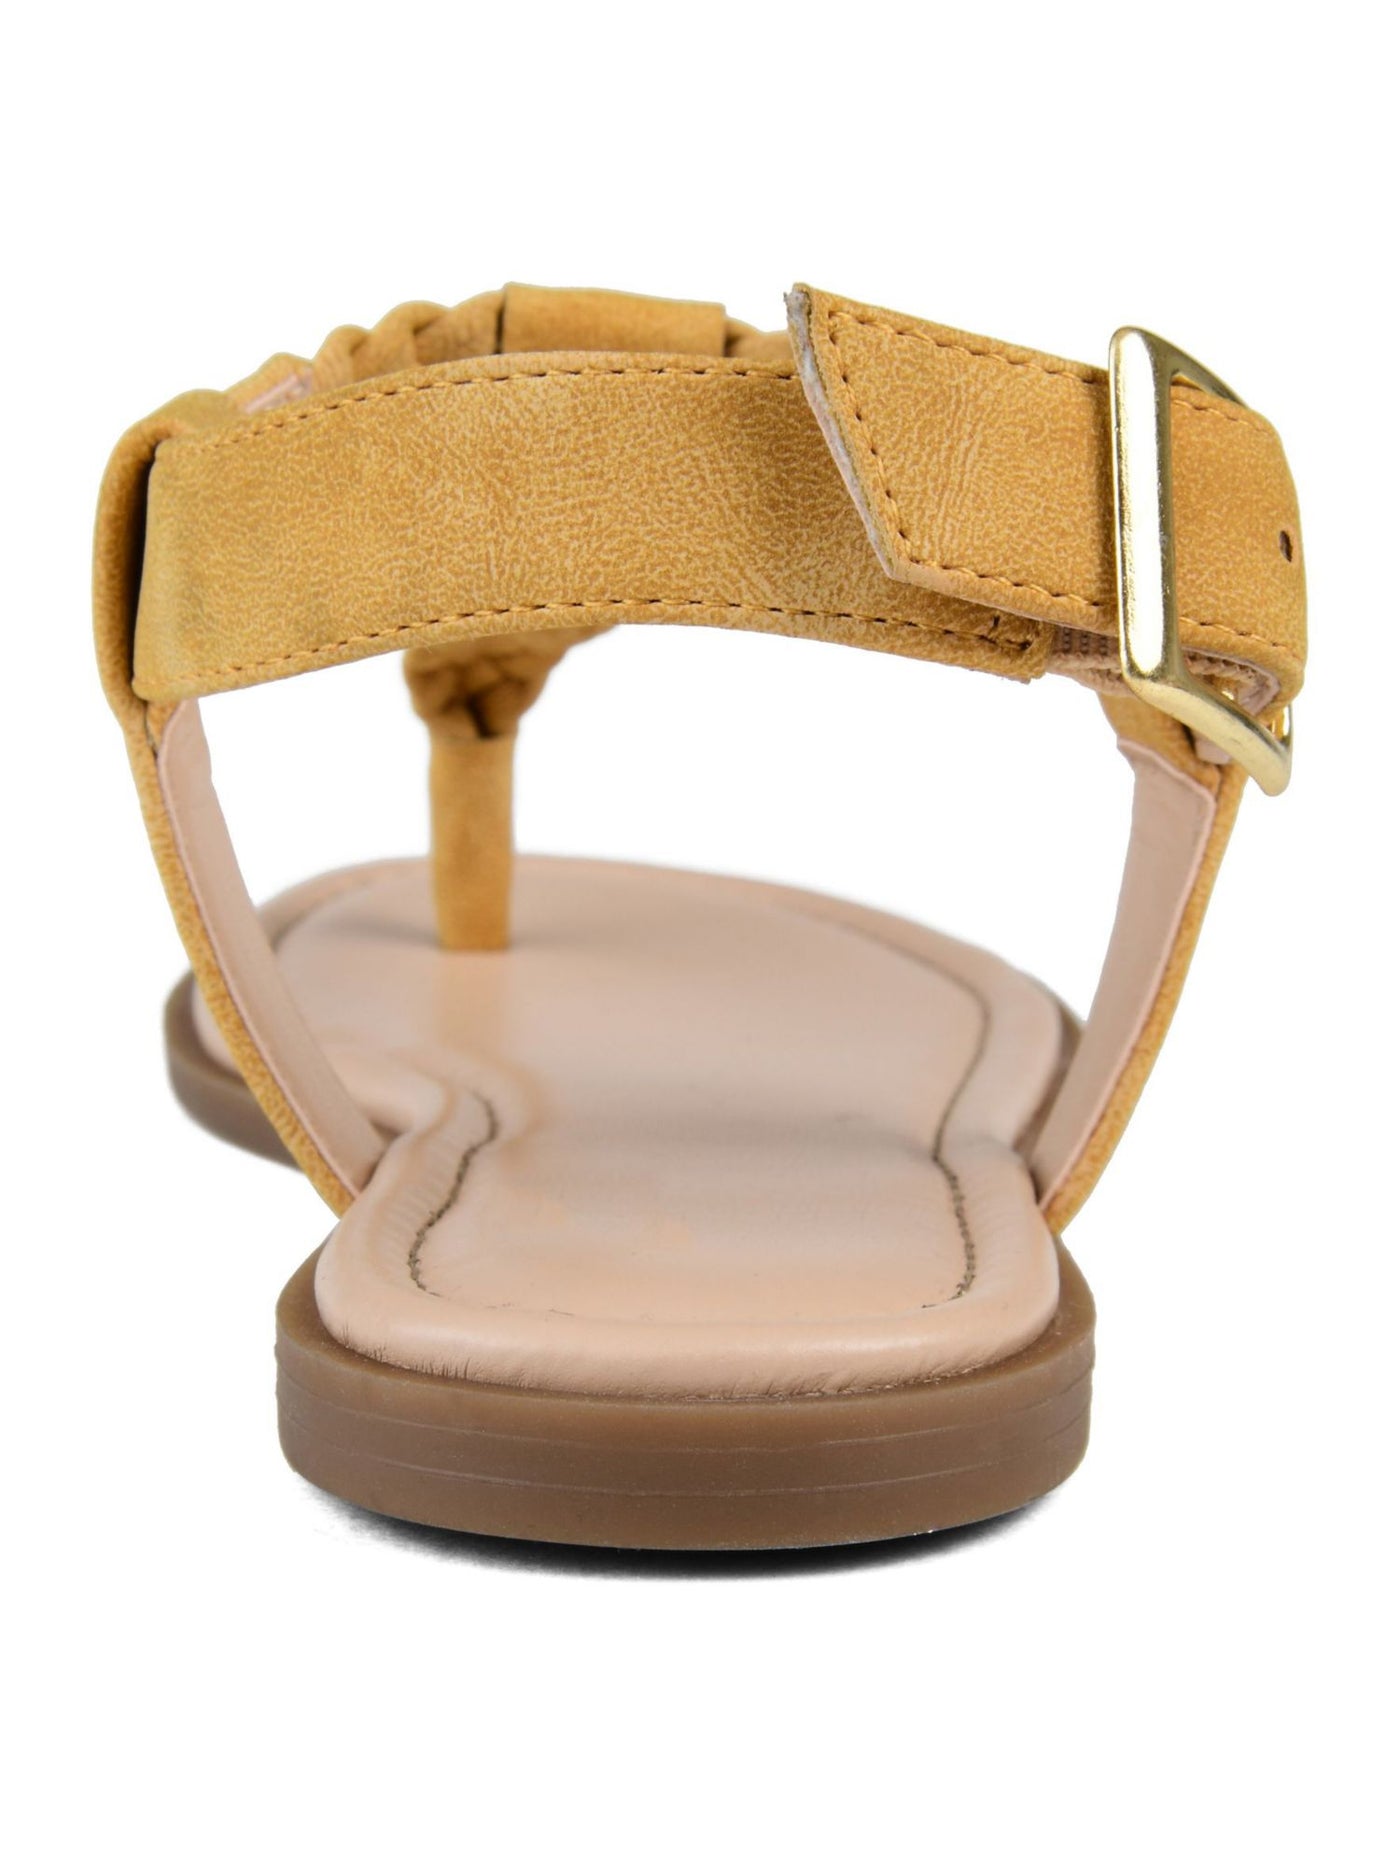 JOURNEE COLLECTION Womens Yellow Studded Buckle Accent Comfort T-Strap Genevive Round Toe Buckle Sandals Shoes 5.5